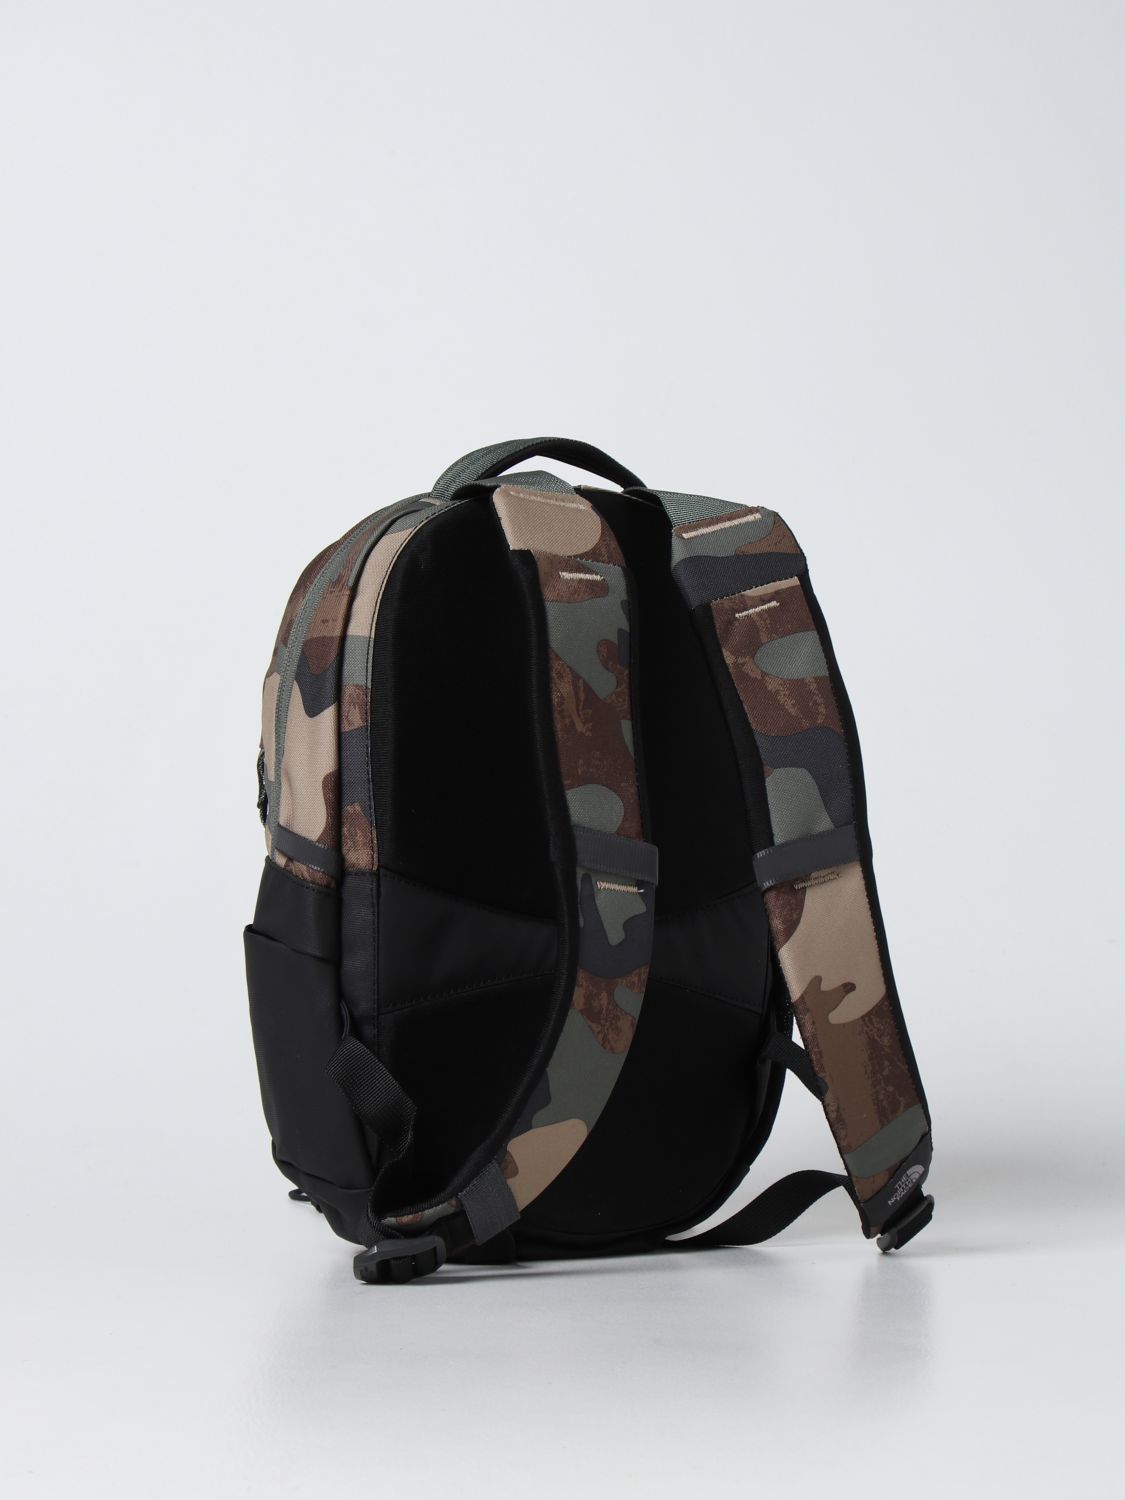 Rucksack The North Face: Rucksack herren The North Face military 2